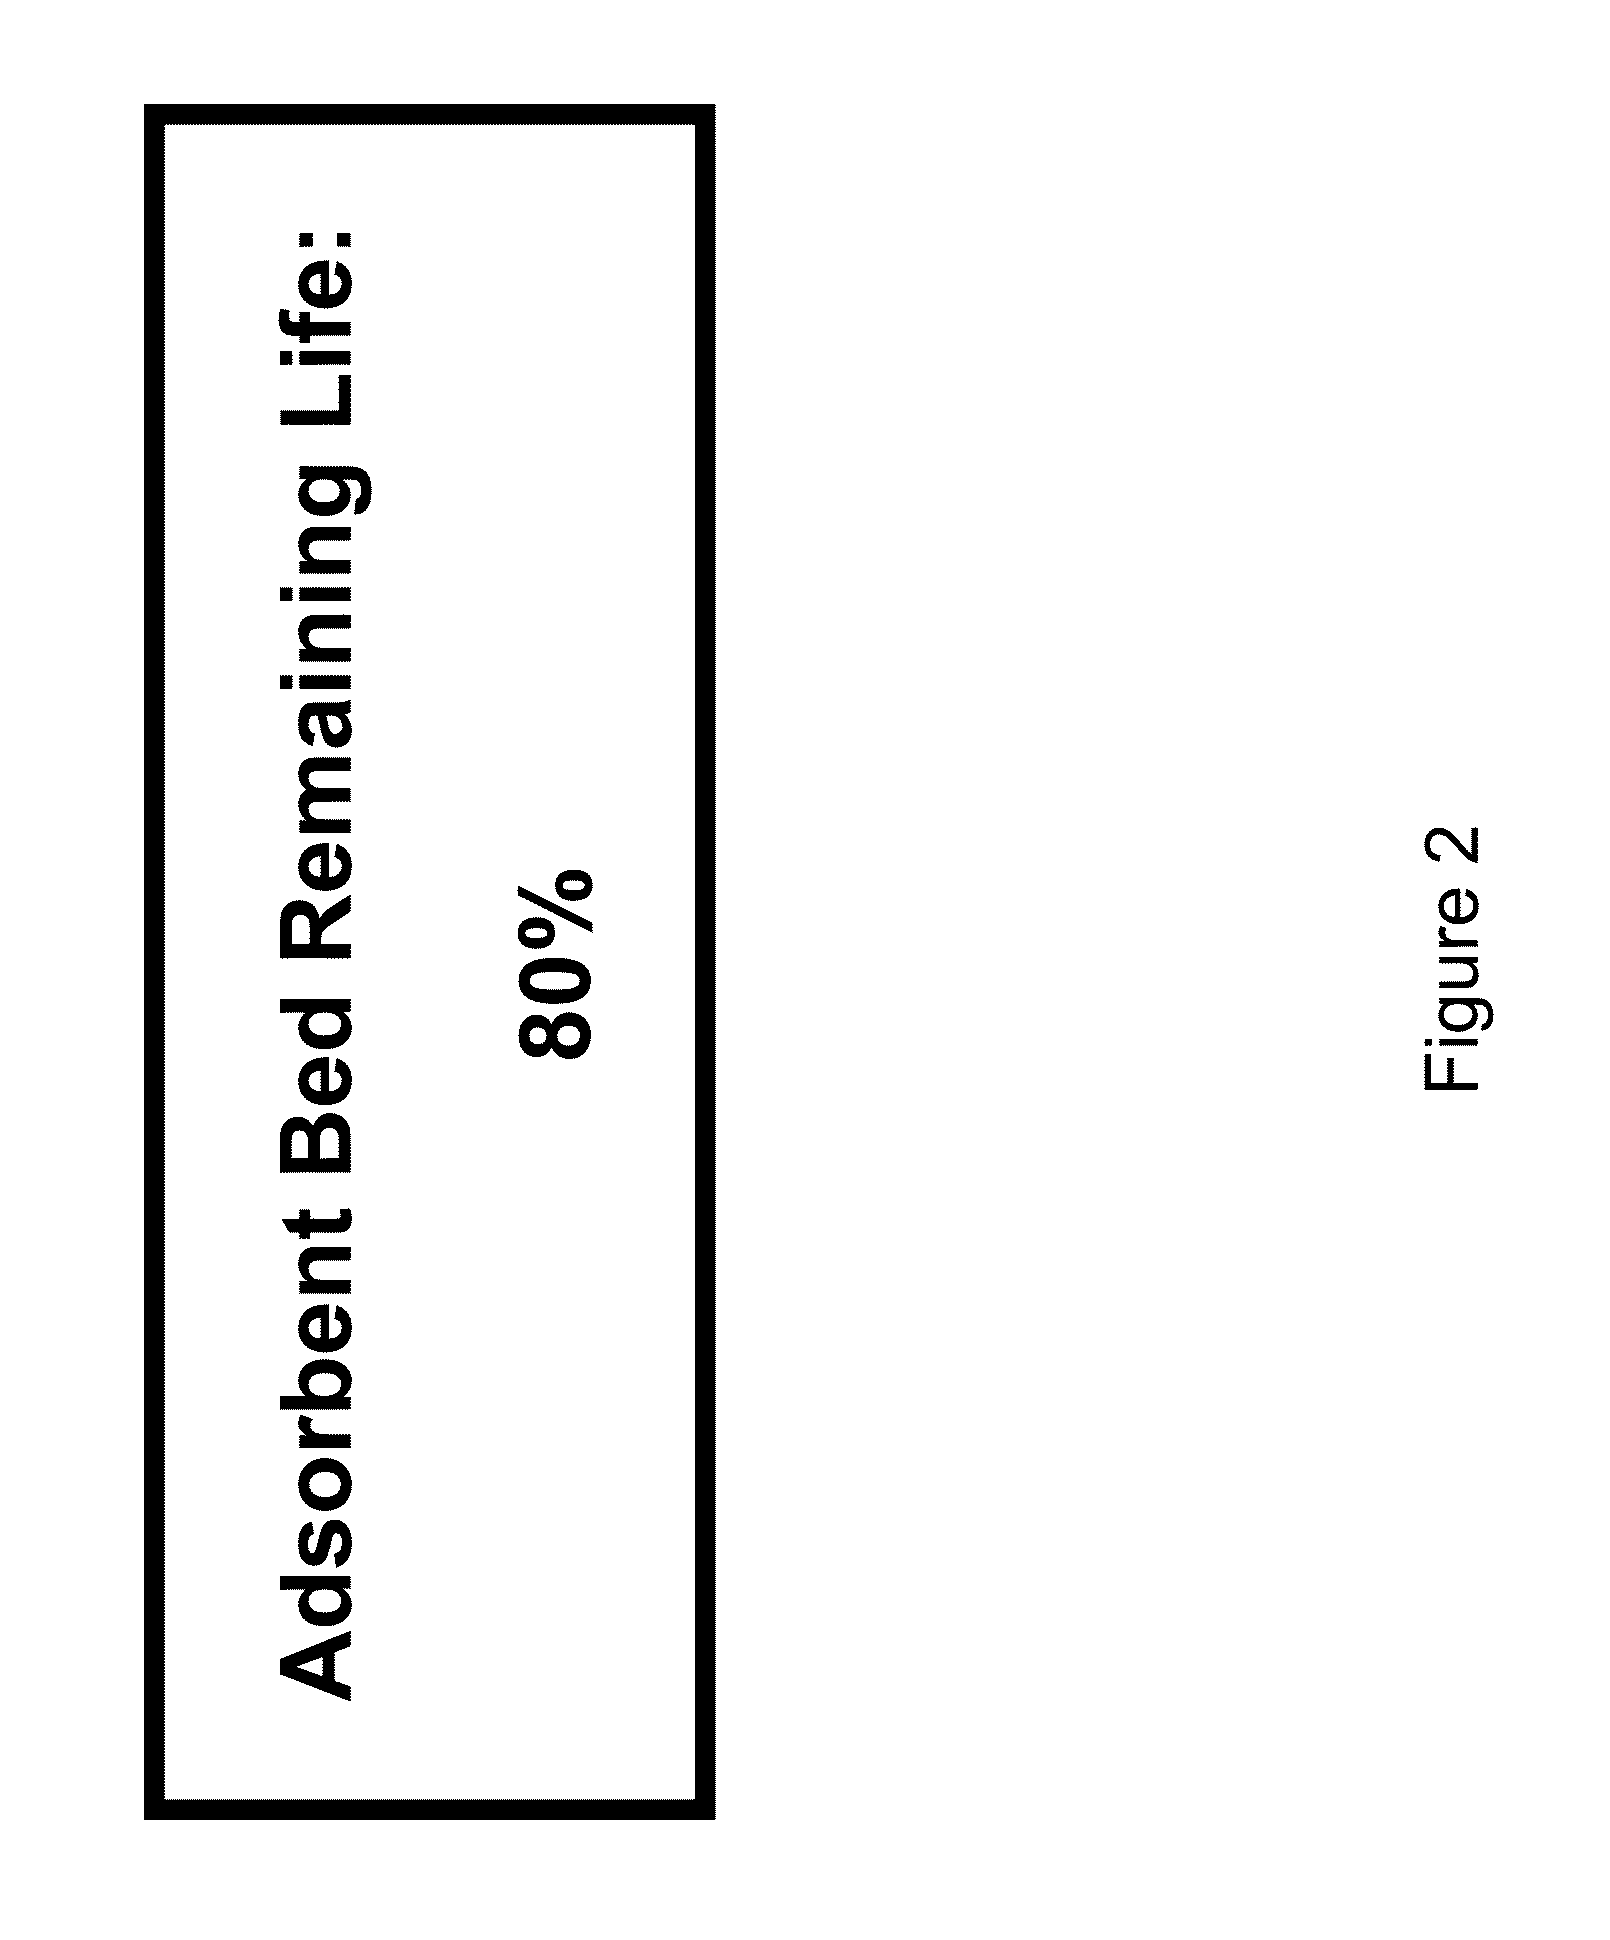 Adsorber Replacement Notification for a Portable Gas Concentrator